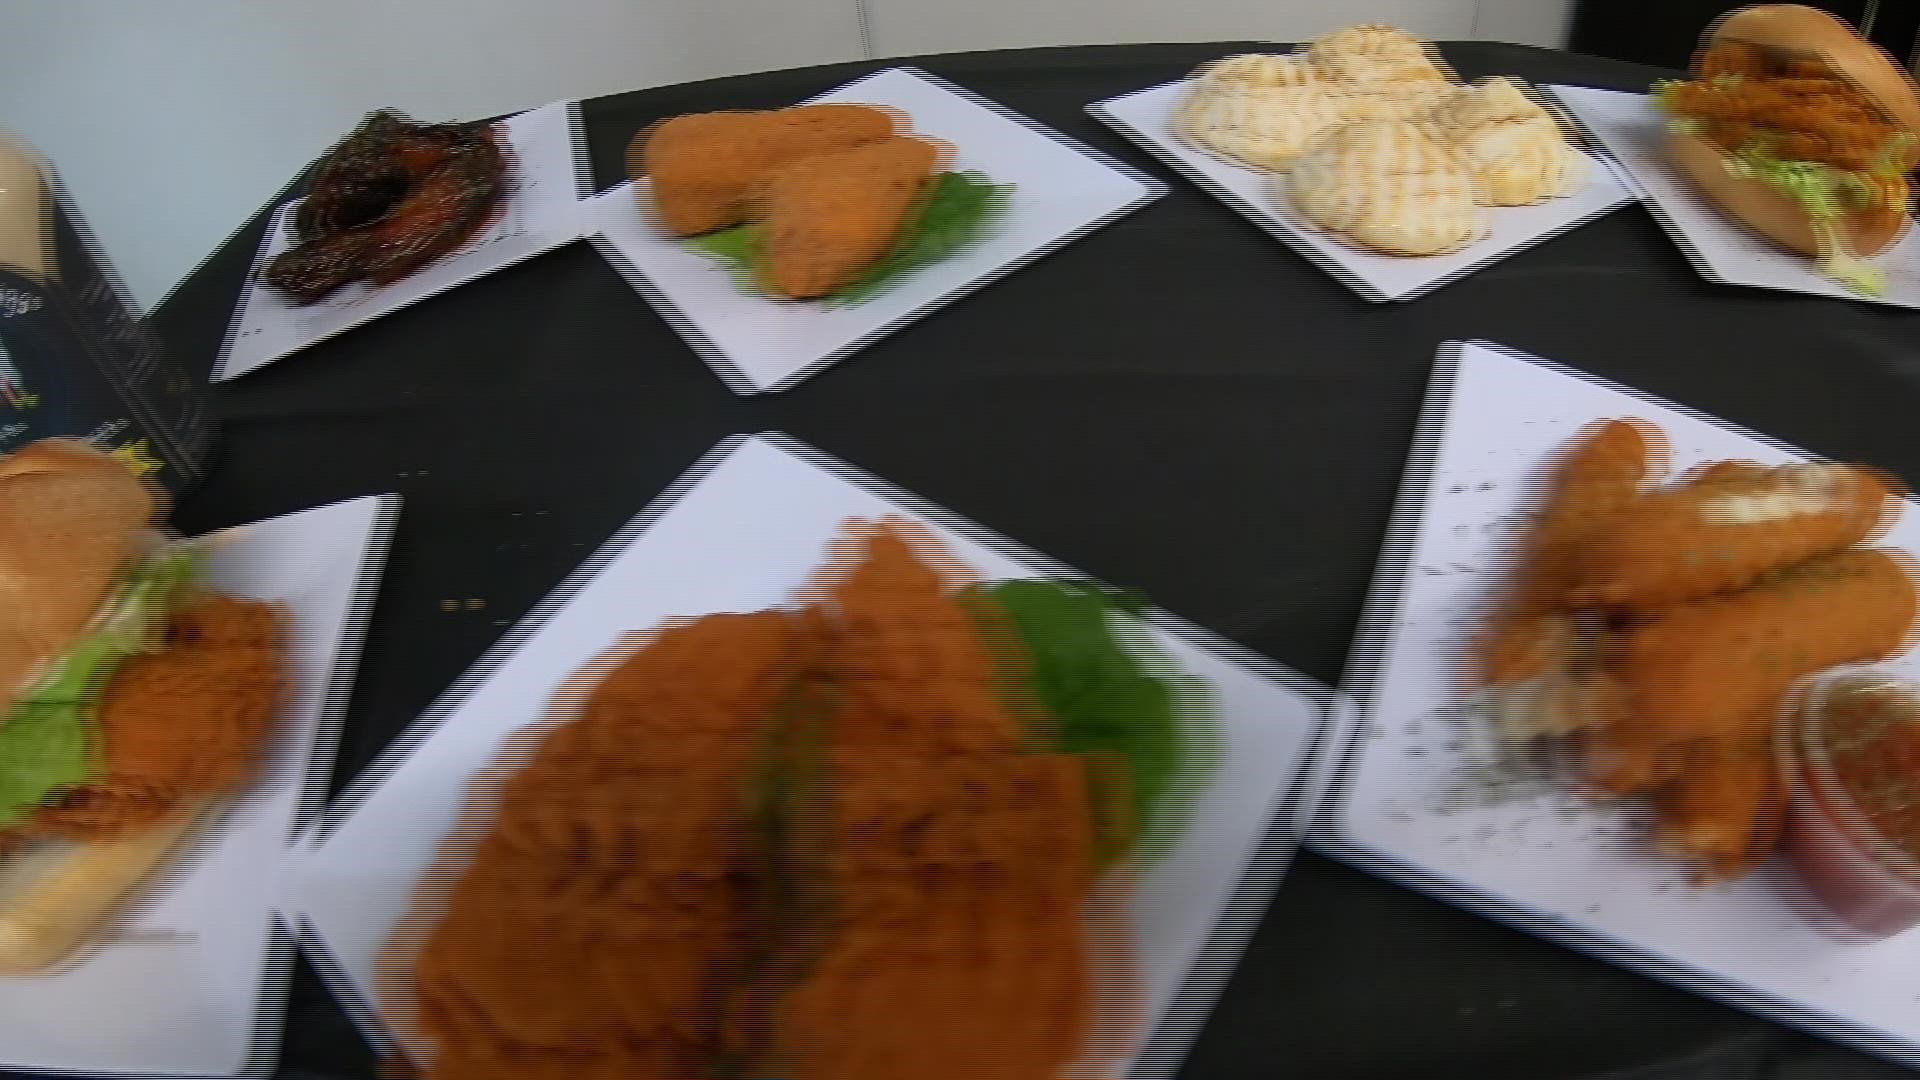 FOX61's Sean Pragano visited B&B Wings and Things in Middletown, Conn. for Foodie Friday. They offer vegan options, including chickpea-based wings.